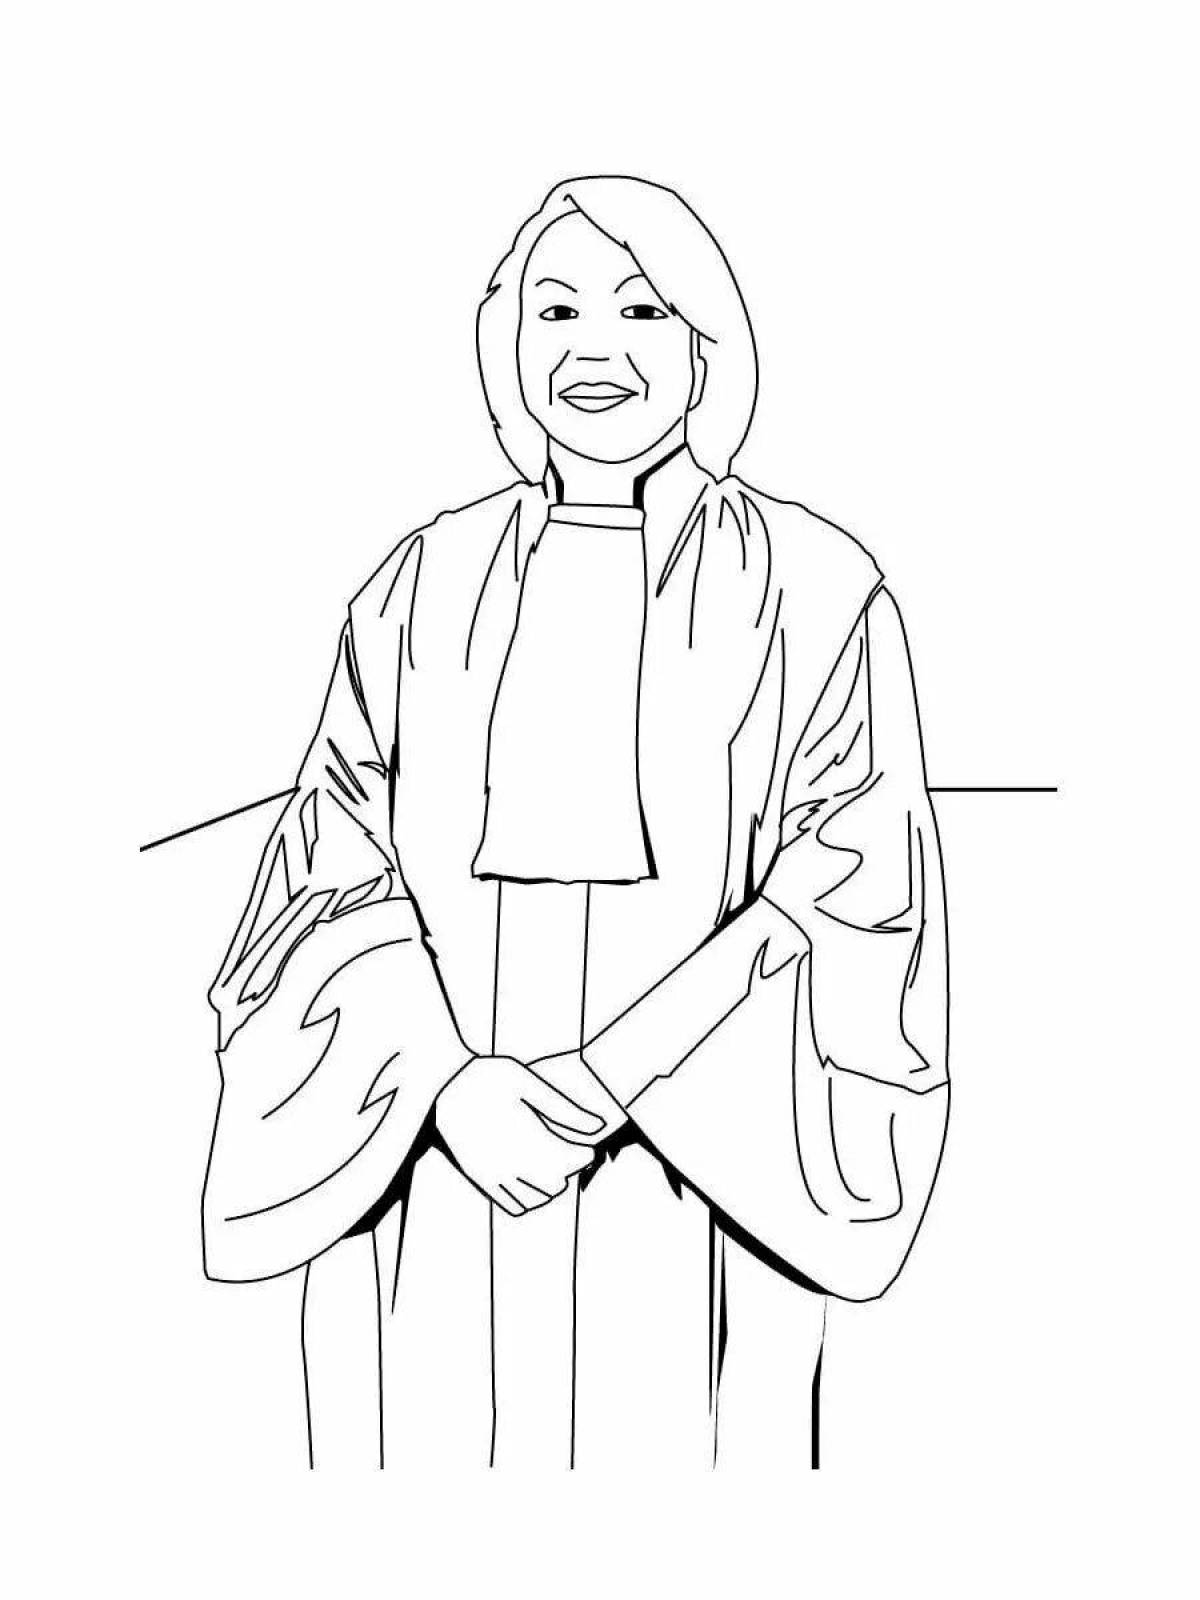 Cheerful woman coloring pages for children